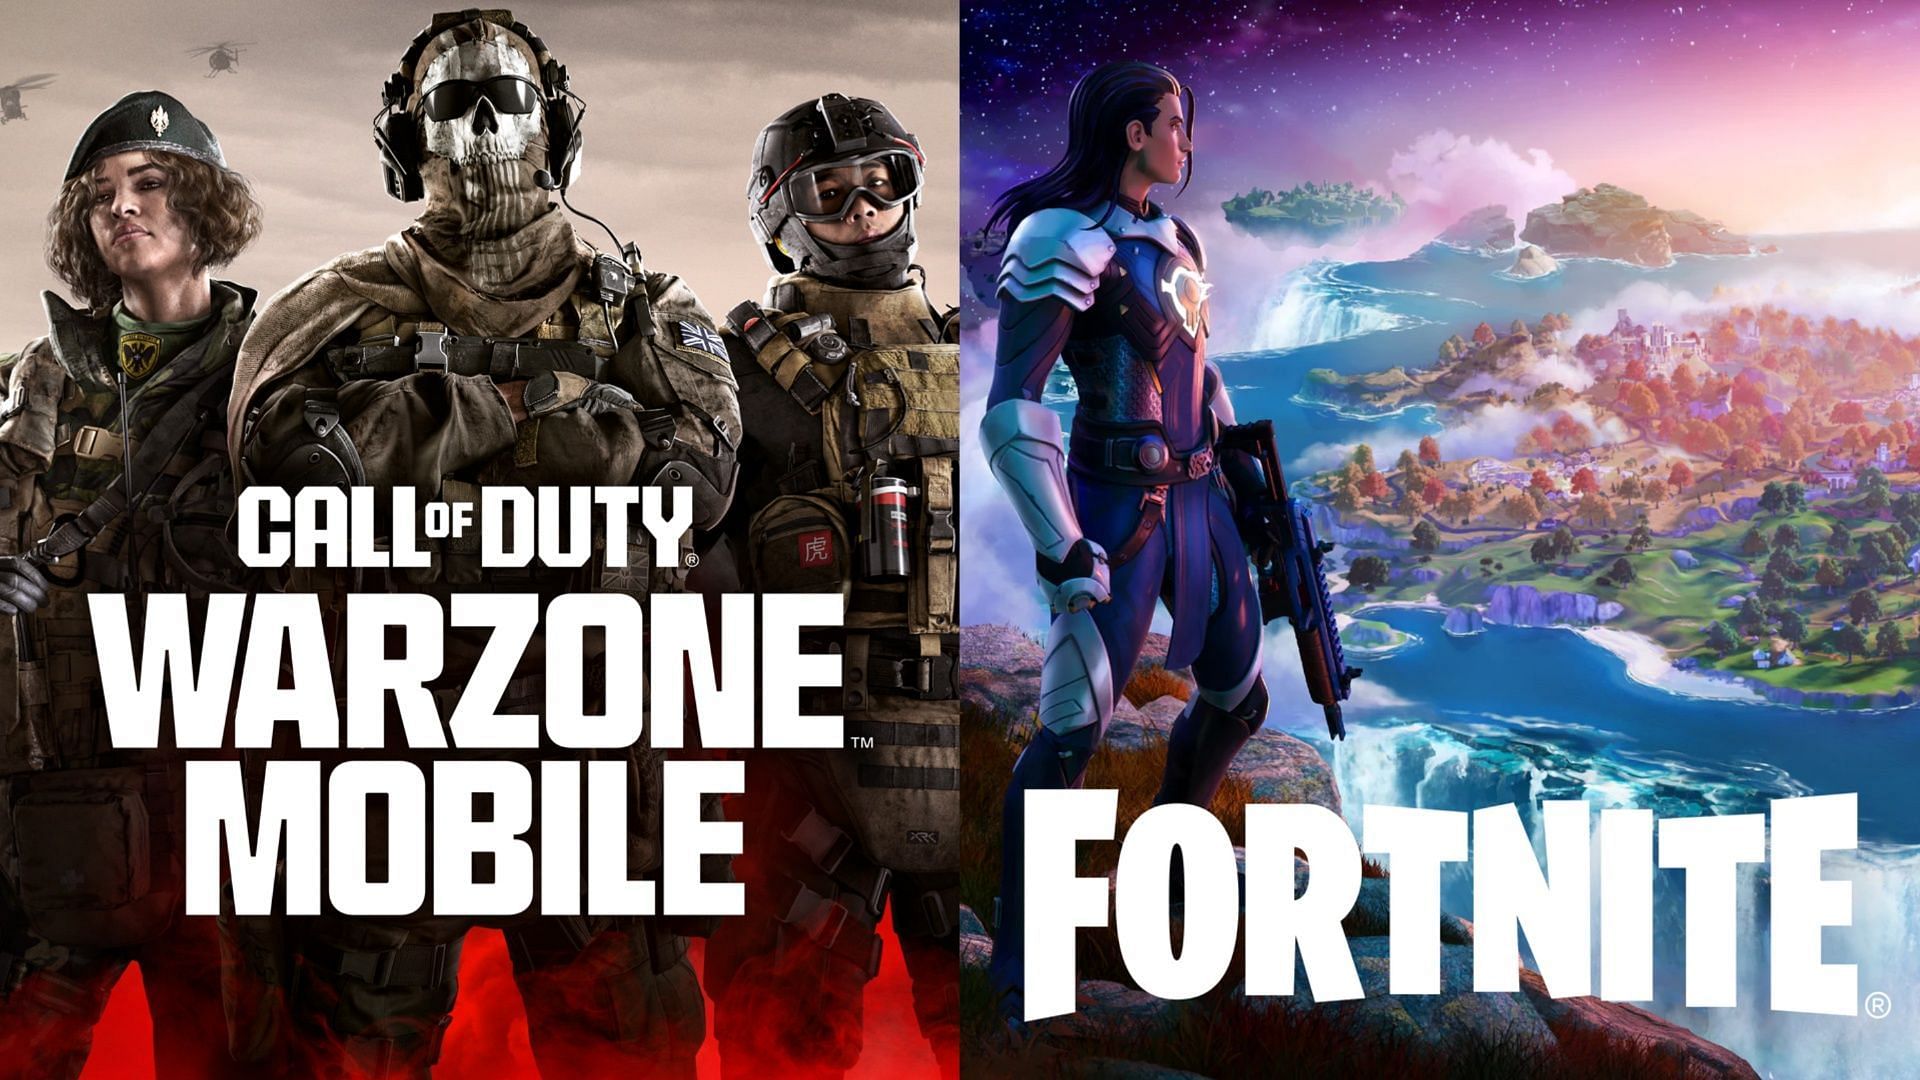 Warzone Mobile on the left and Fortnite Mobile on the right